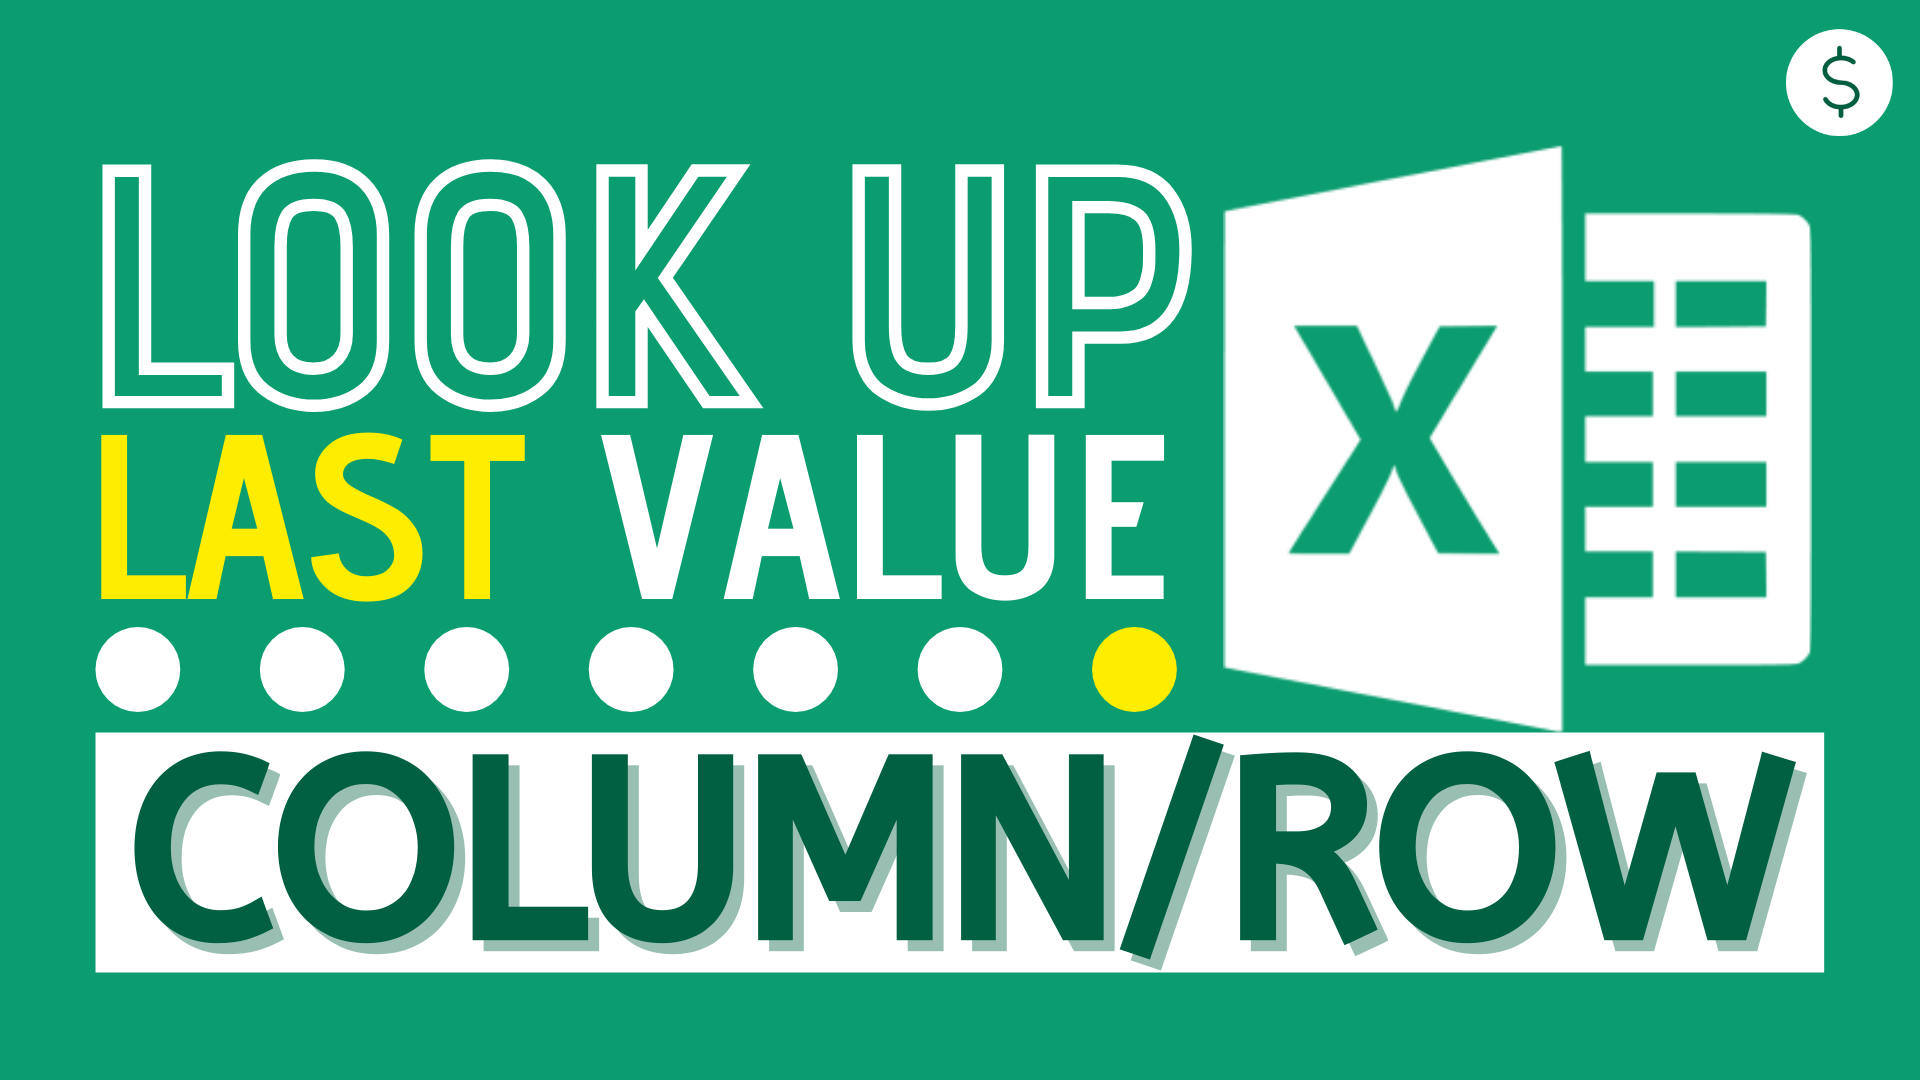 Look Up the Last Value in Column/Row in Excel